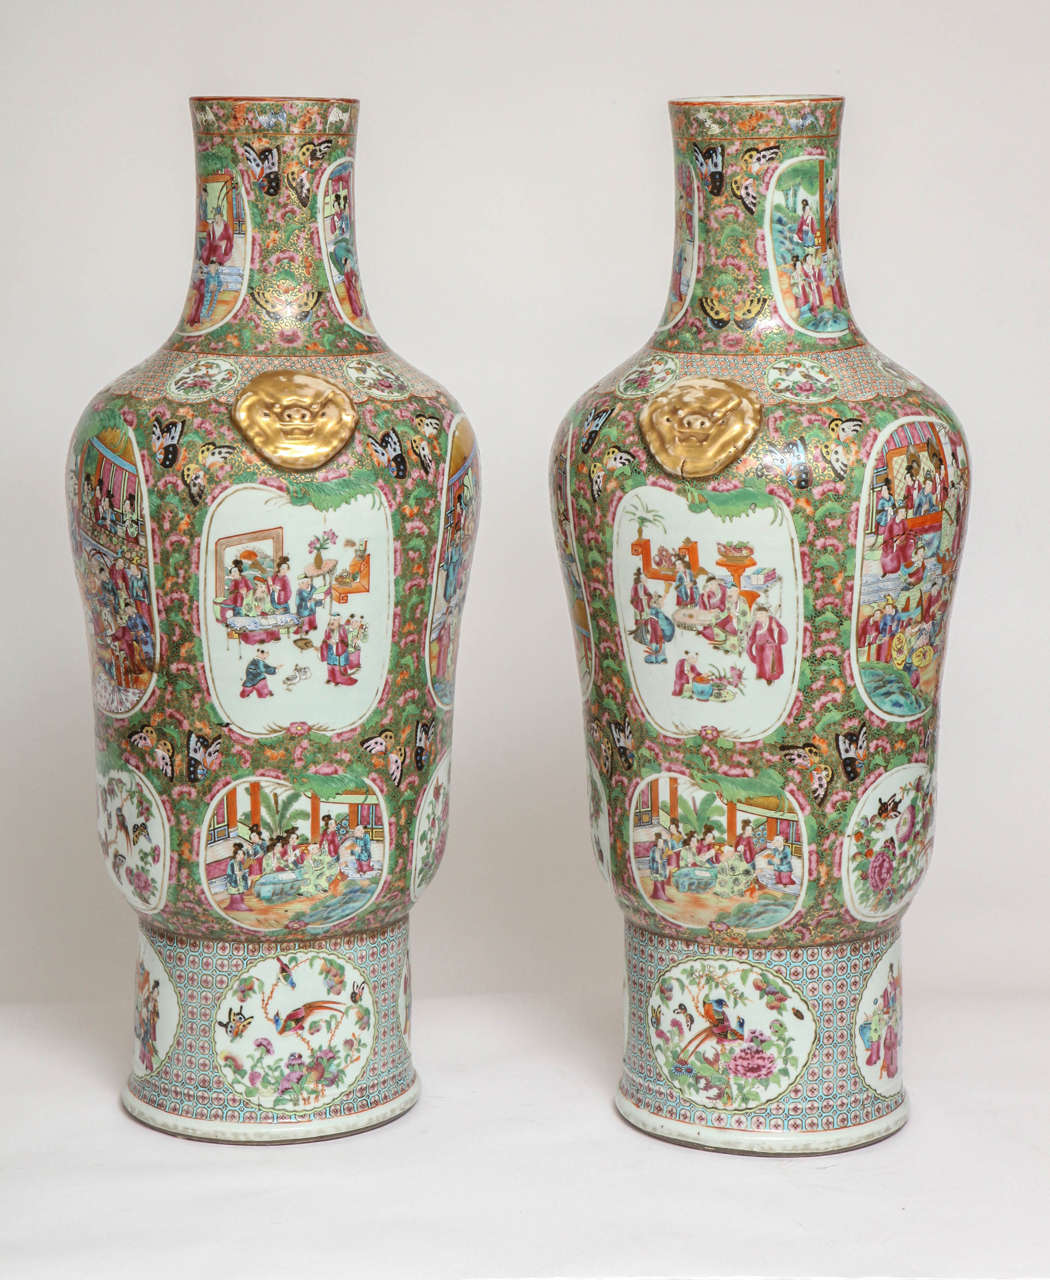 An unusual pair of large Chinese export canton famille rose thousand butterfly porcelain vases. The vase has a very unusual shape and was most probably made by specific order. The entirety of the vase is painted with a 24-karat gold background, then